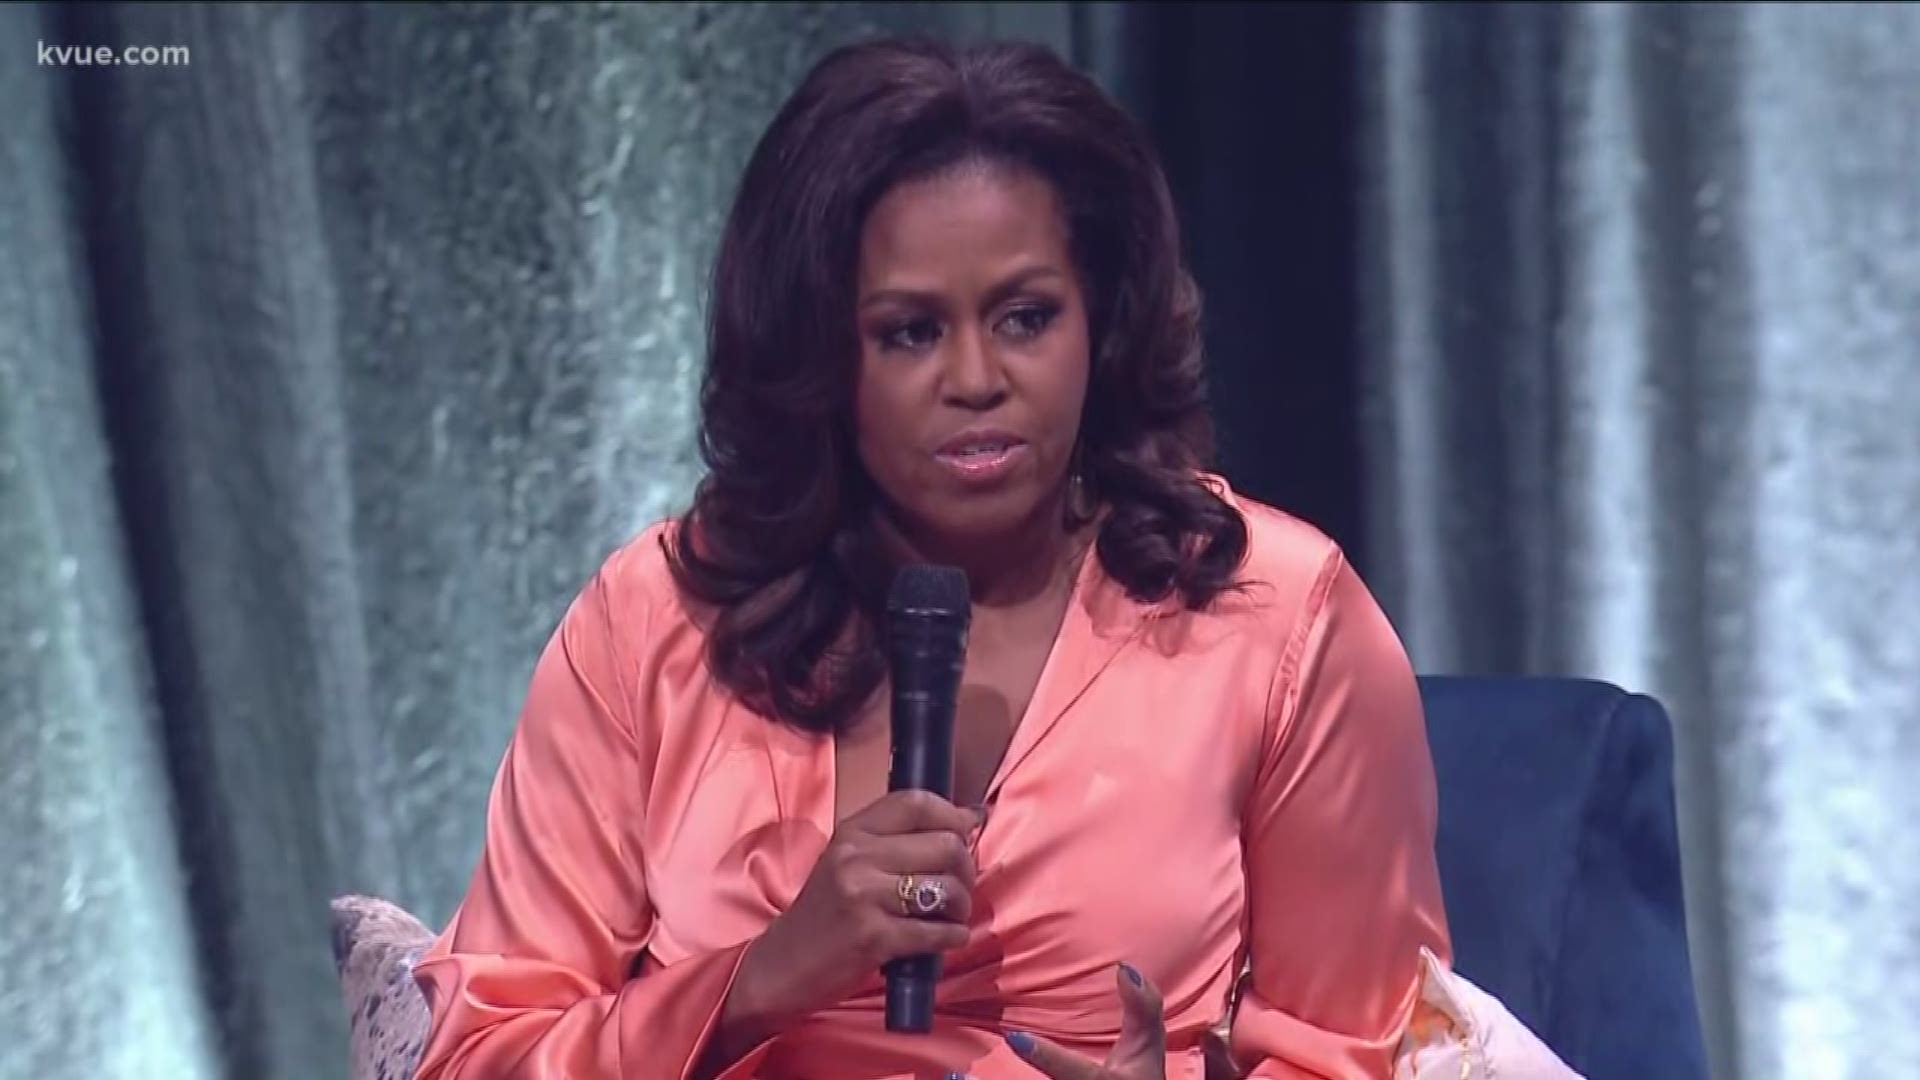 Former First Lady Michelle Obama stopped in Austin to speak to a packed crowd at the Frank Erwin Center.